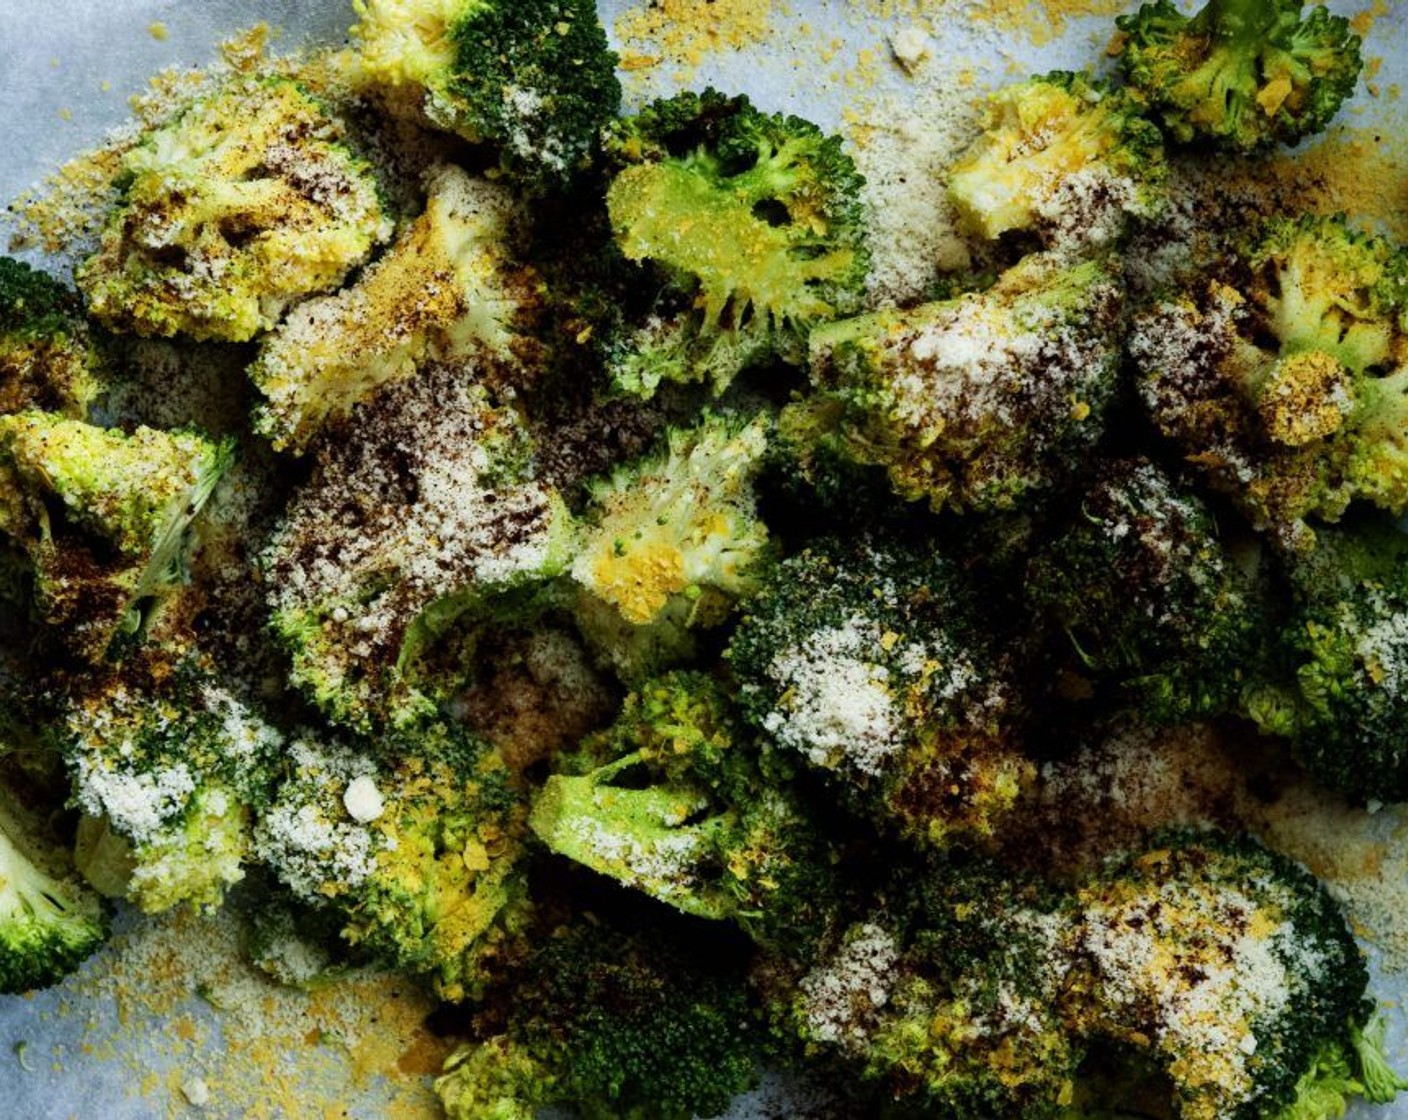 step 2 Chop your Broccoli (6 cups) into florets and spread them on a baking sheet. Drizzle with Extra-Virgin Olive Oil (1/4 cup), Nutritional Yeast (3 Tbsp), Almond Flour (3 Tbsp), Salt (1 tsp) and Paprika (1/2 tsp).